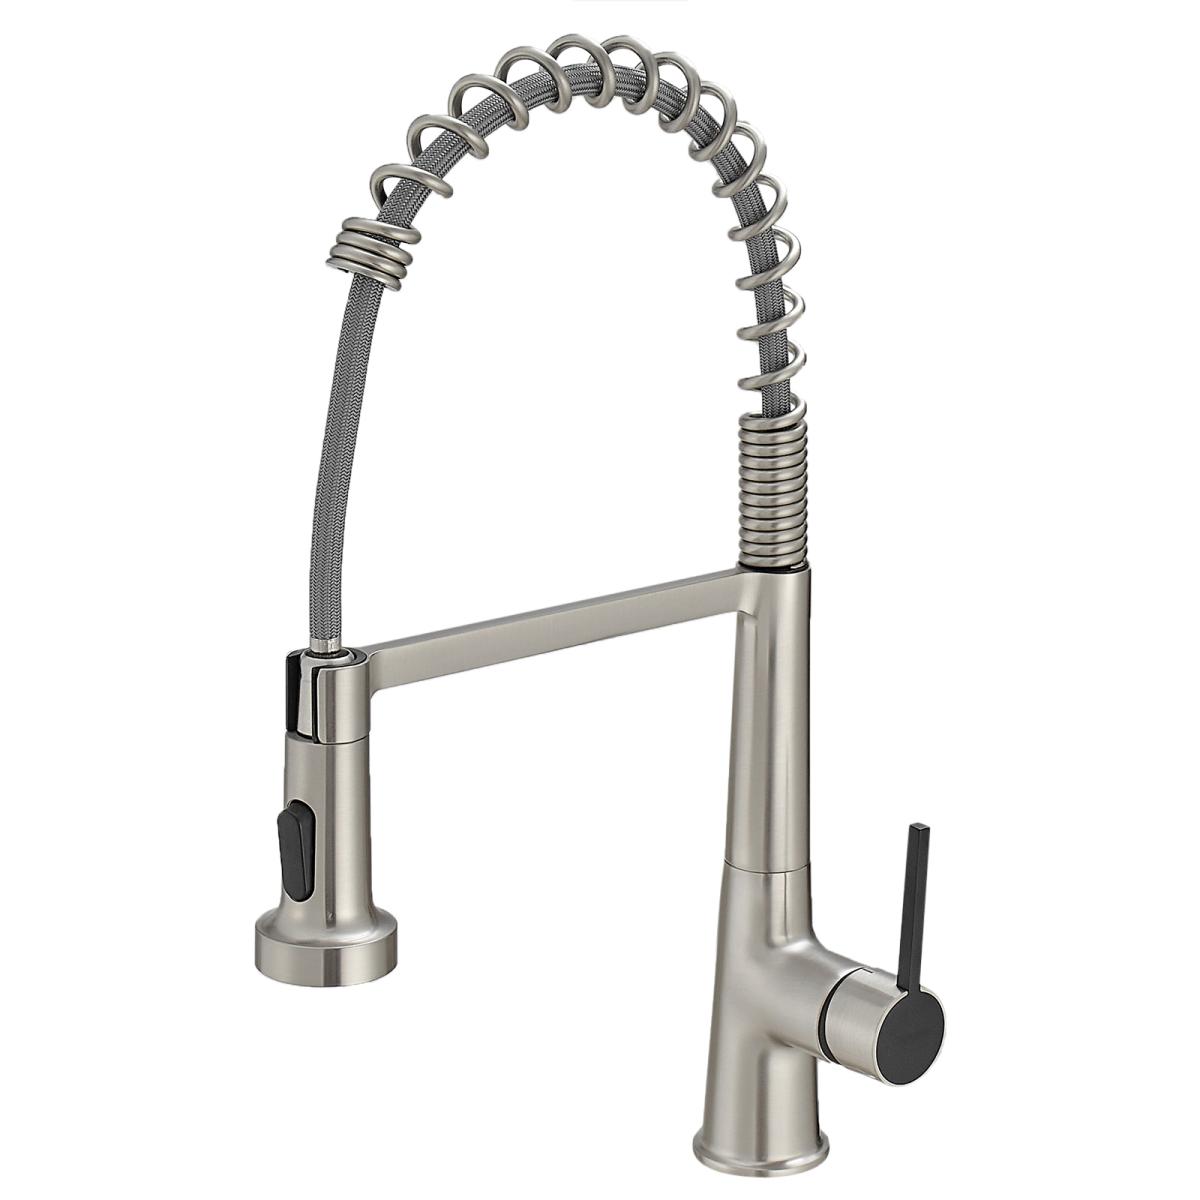 Faucet for Kitchen Sink, Brushed Nickel Kitchen Faucet with Pull Down Sprayer, Modern Commercial Spring Pull-Out Kitchen Sink Faucet